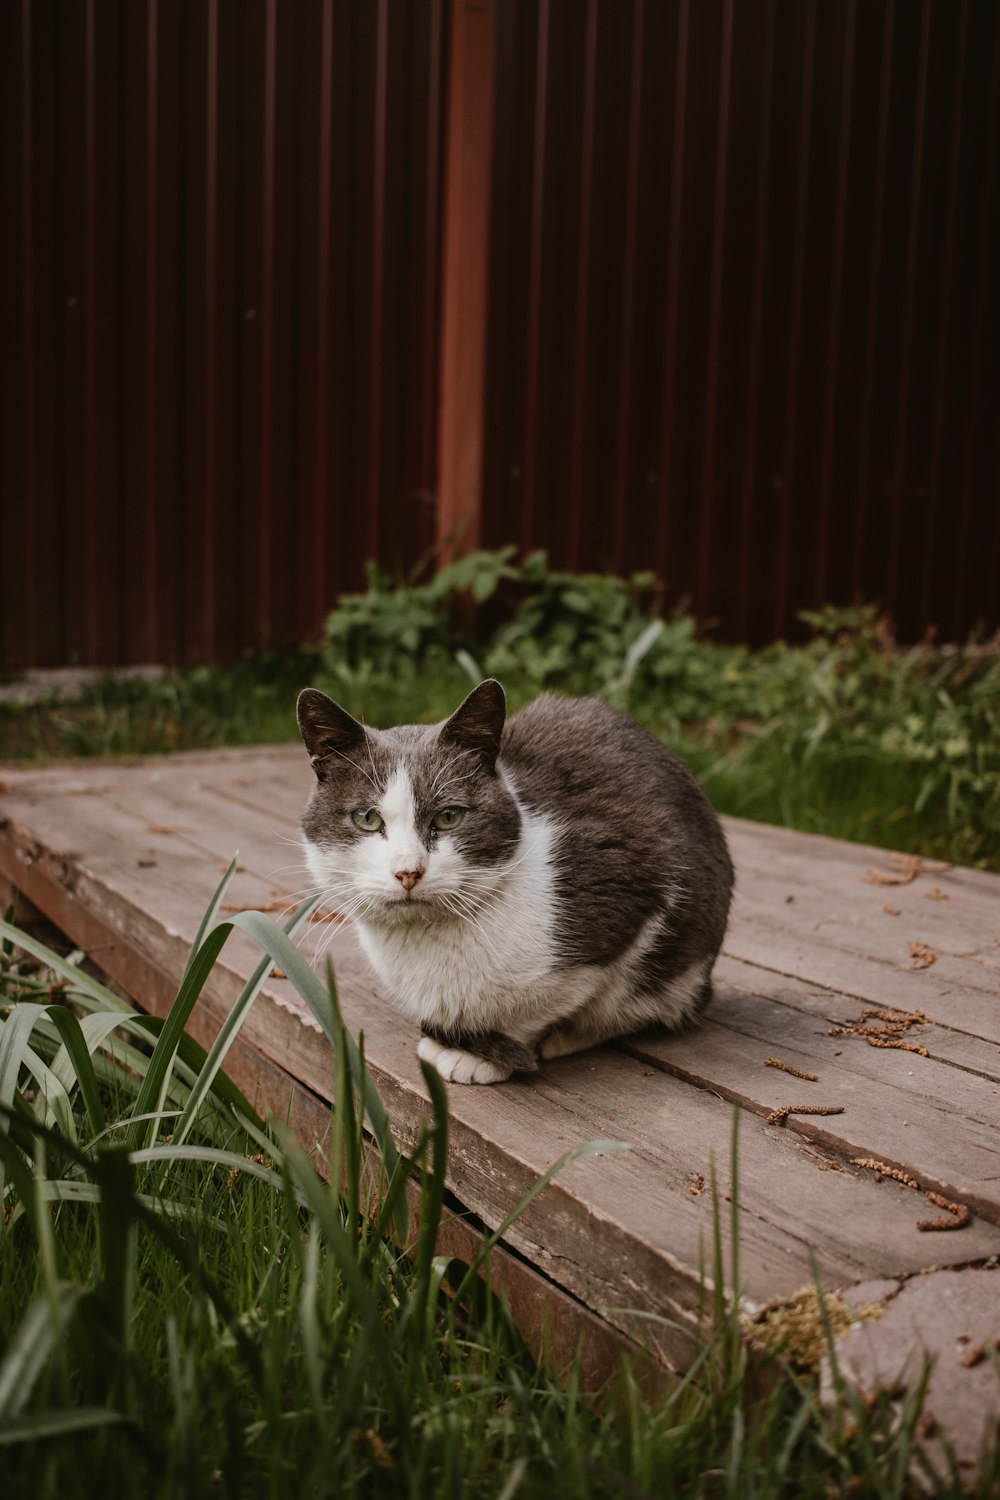 a gray and white cat sitting on a wooden platform